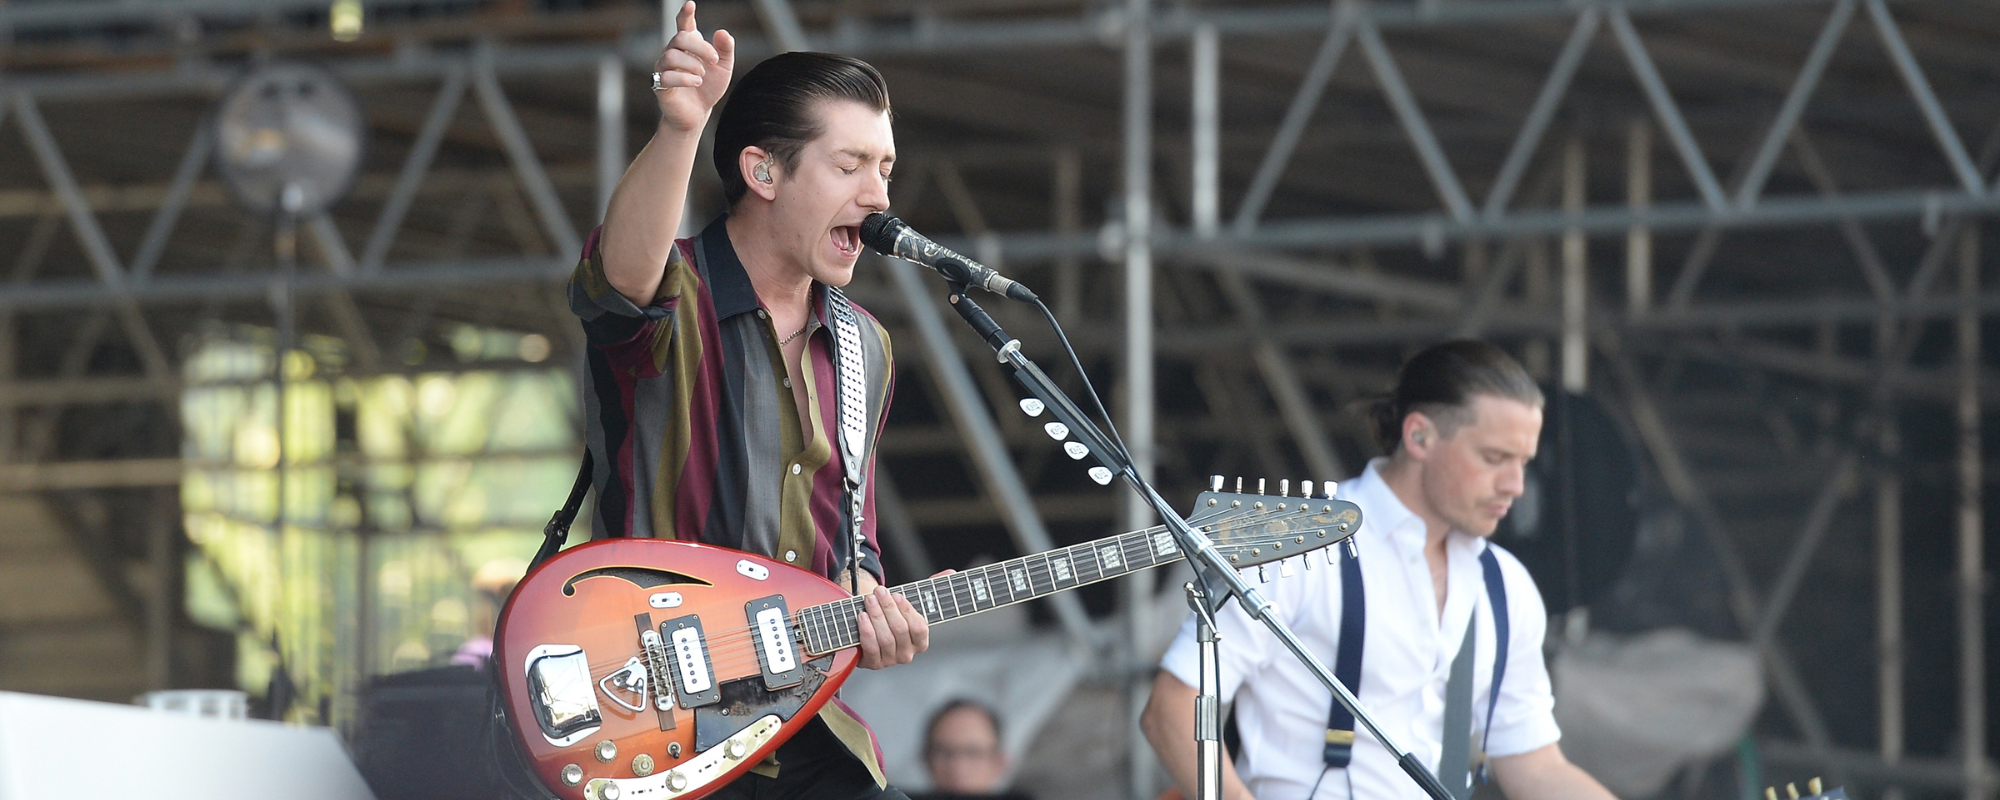 Flawless Love for the Flawed: The Meaning Behind “I Wanna Be Yours” by Arctic Monkeys